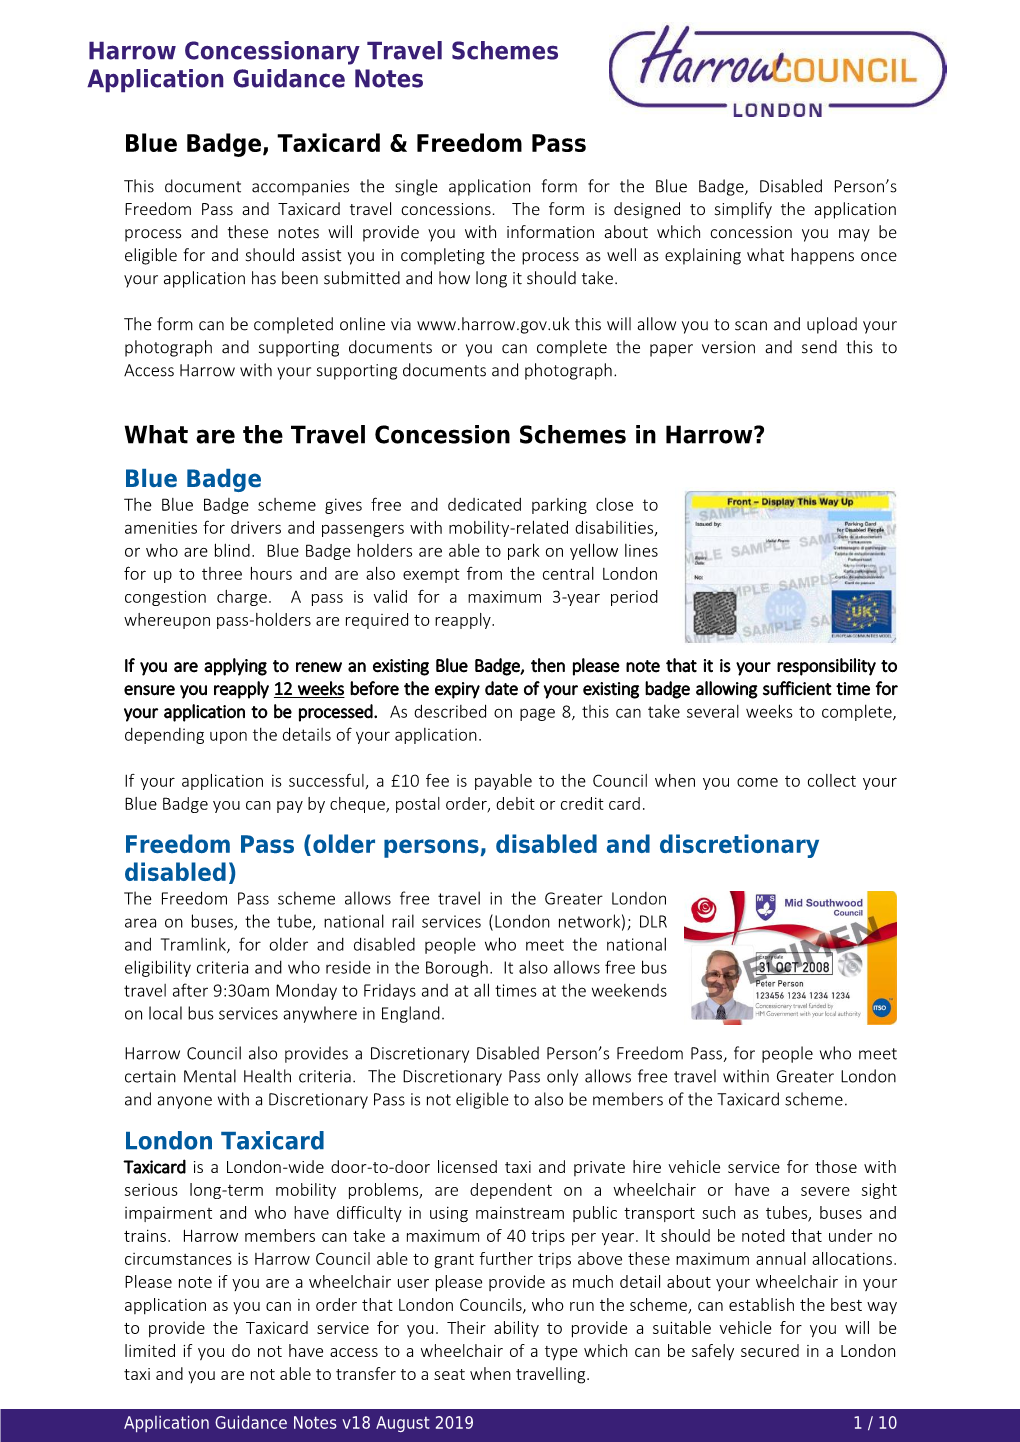 Guidance Notes for Concessionary Travel Applications